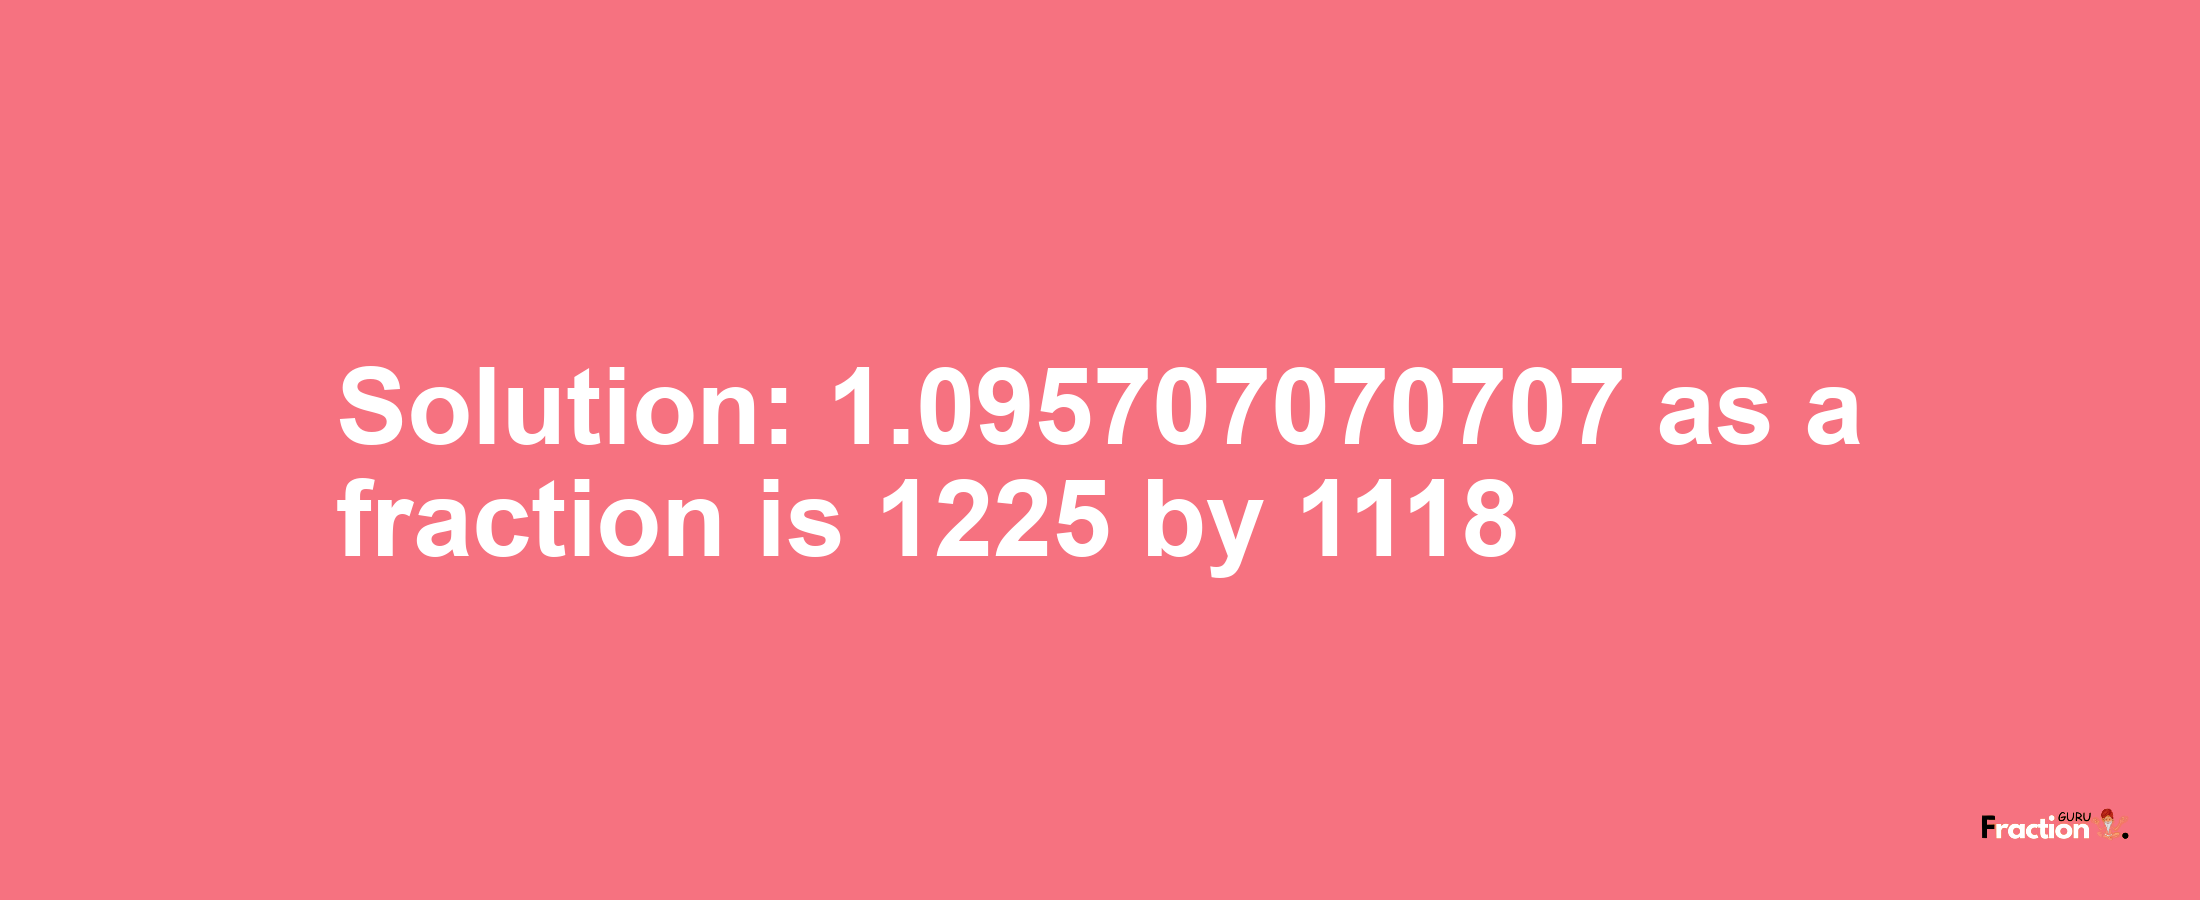 Solution:1.095707070707 as a fraction is 1225/1118